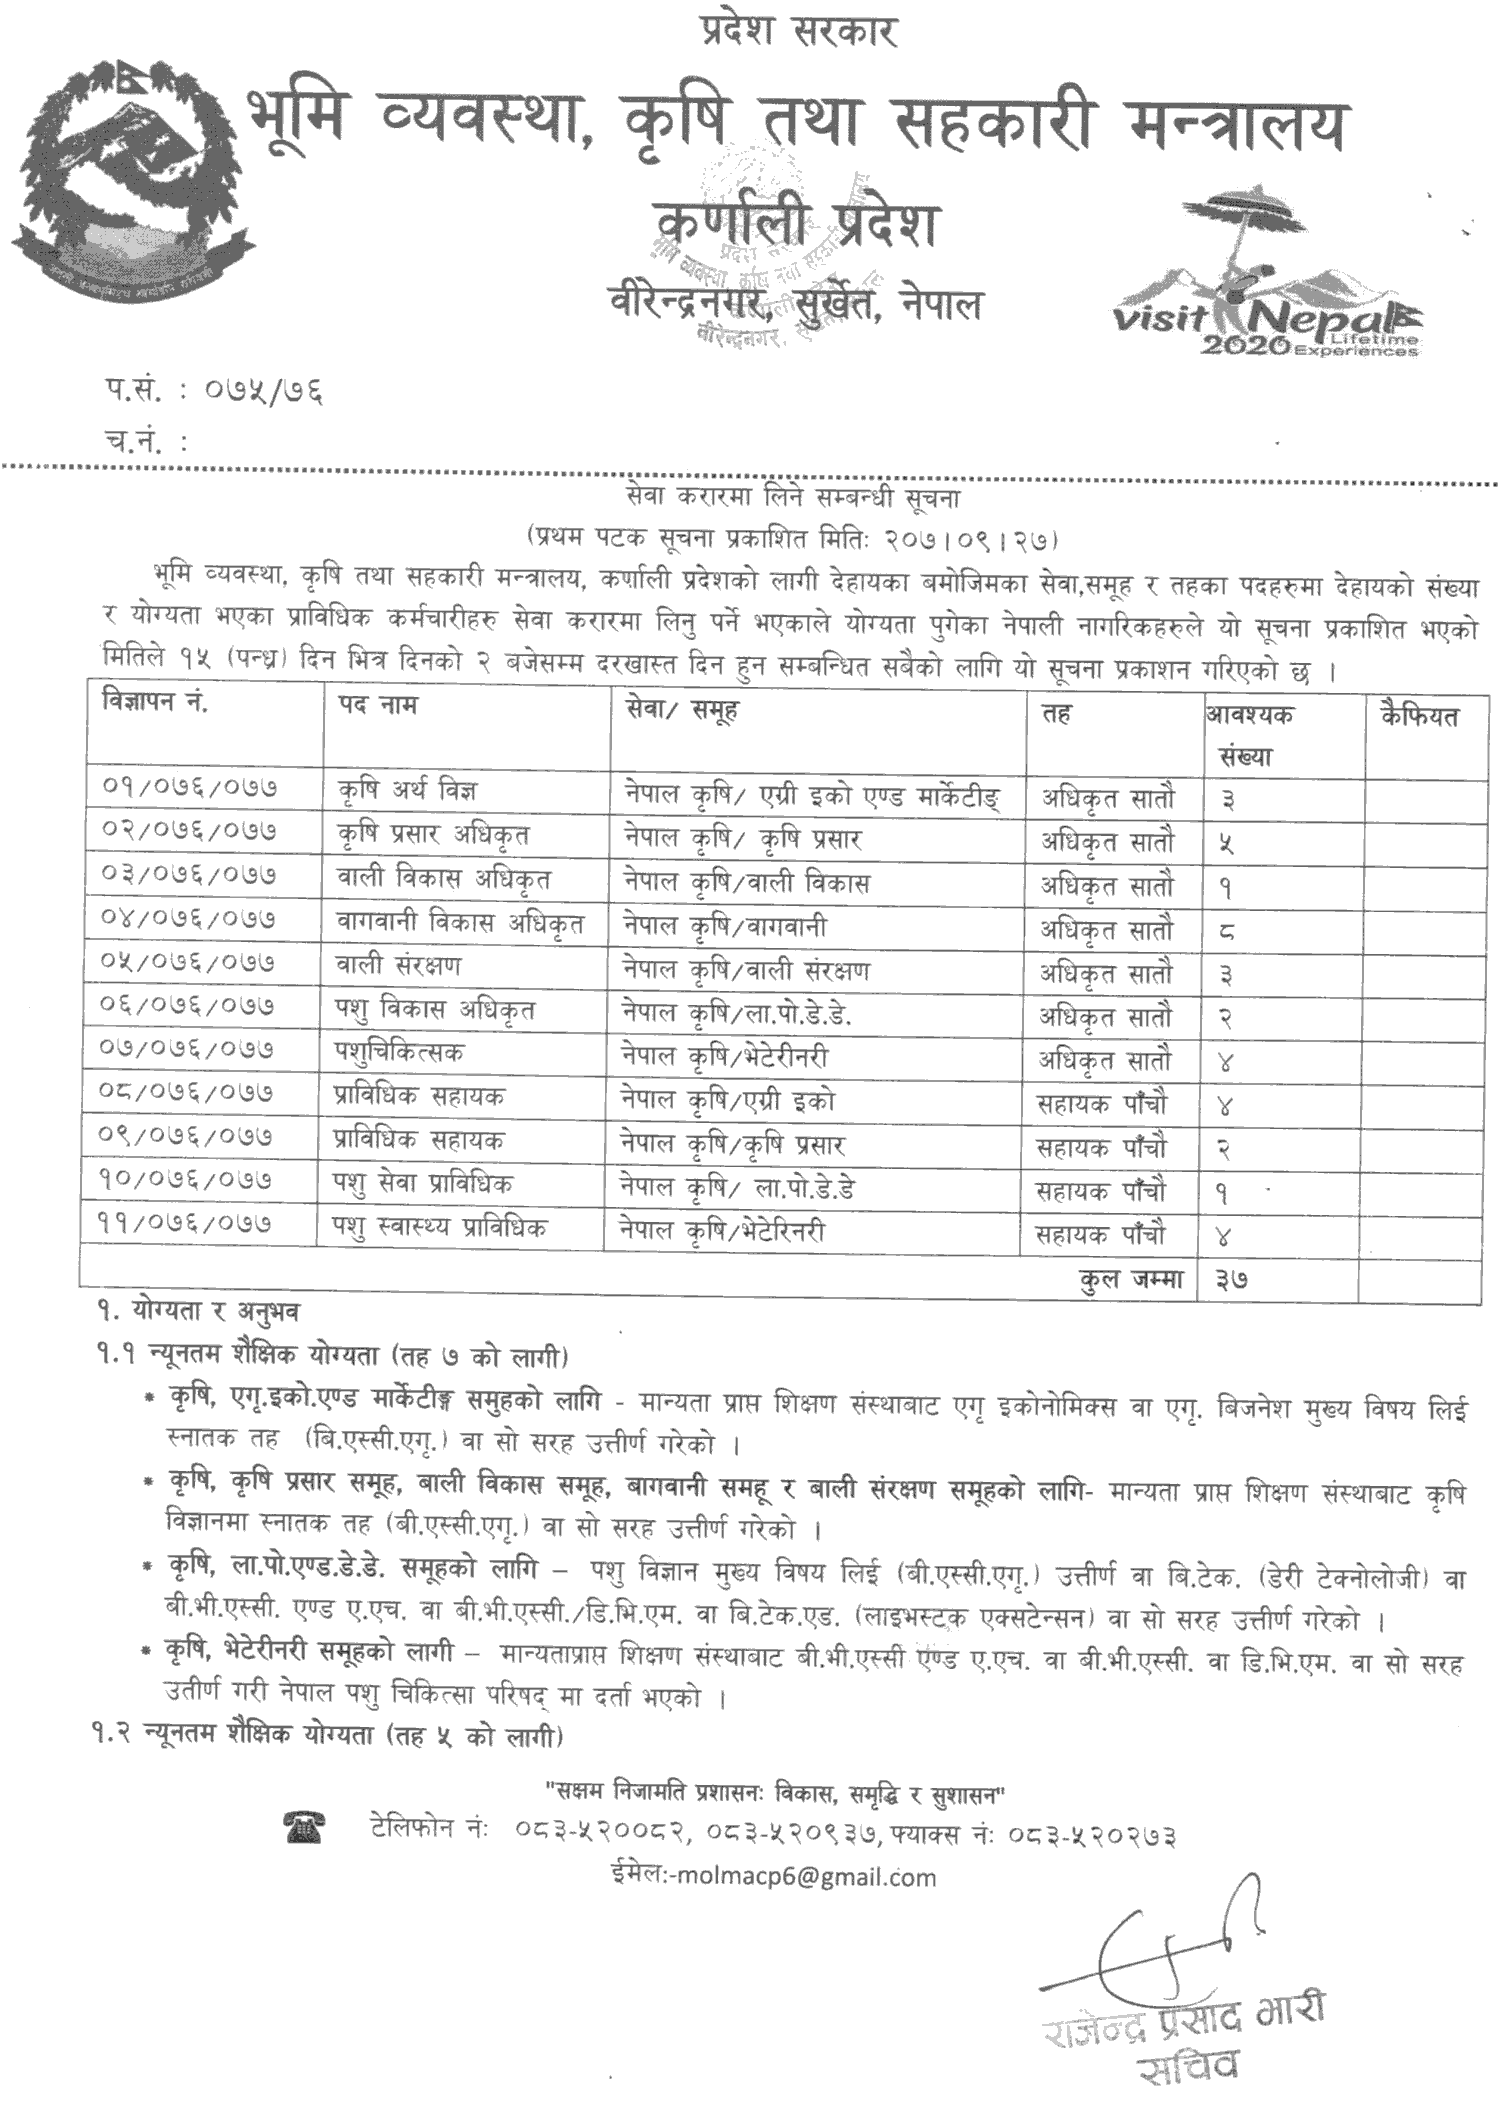 Ministry of Land Management, Agriculture and Cooperatives, Karnali Province Vacancy